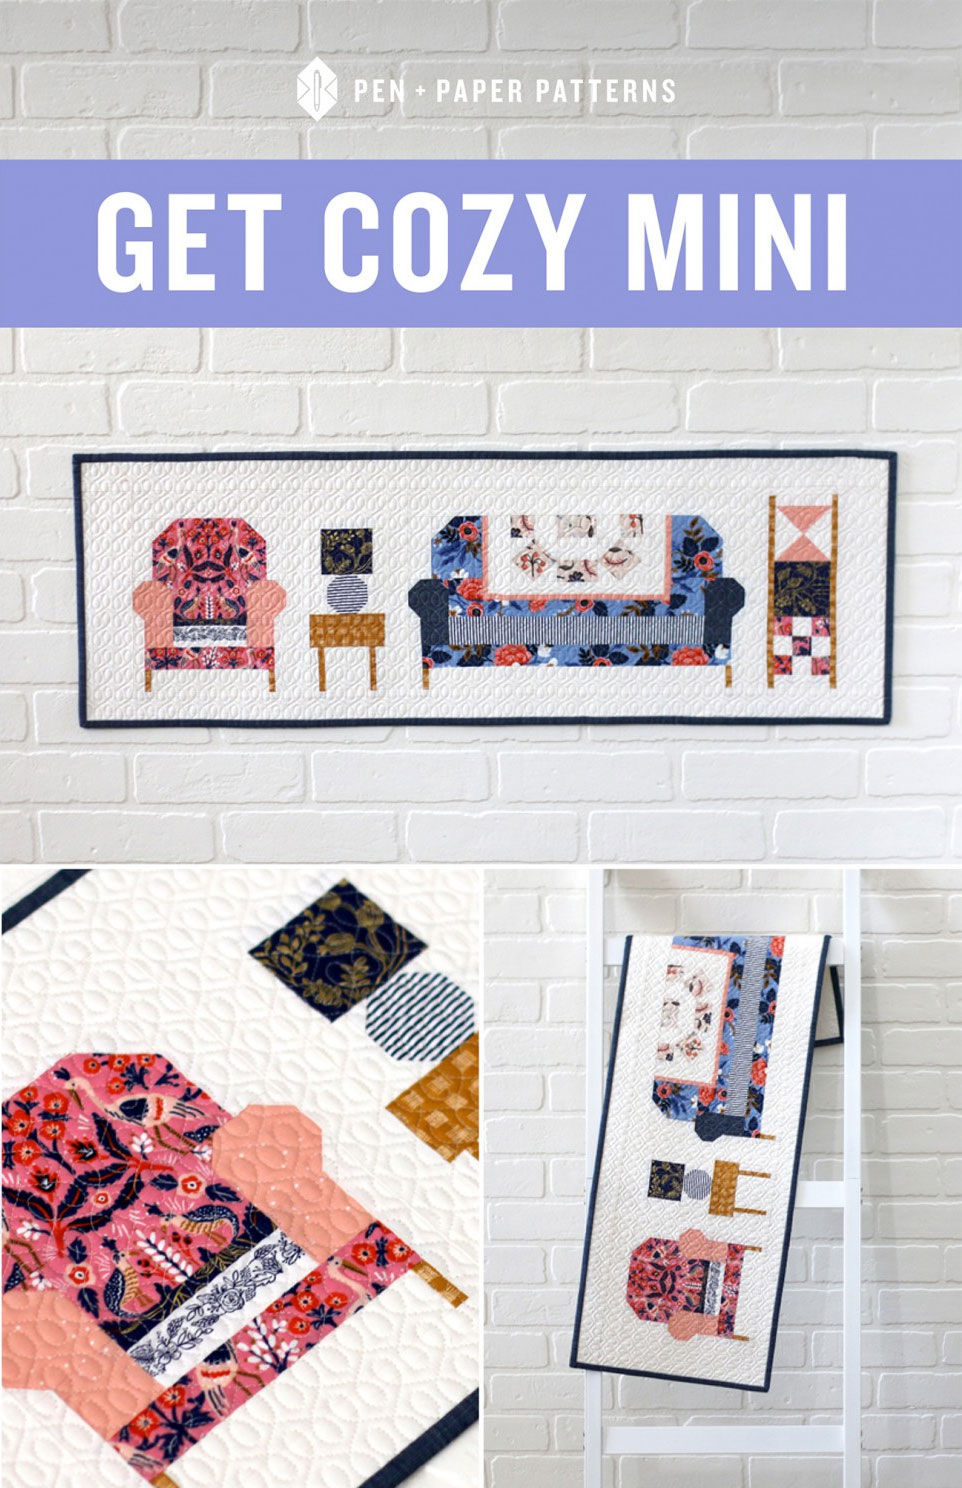 Get-Cozy-Mini-quilt-sewing-pattern-from-Pen-plus-paper-patterns-front